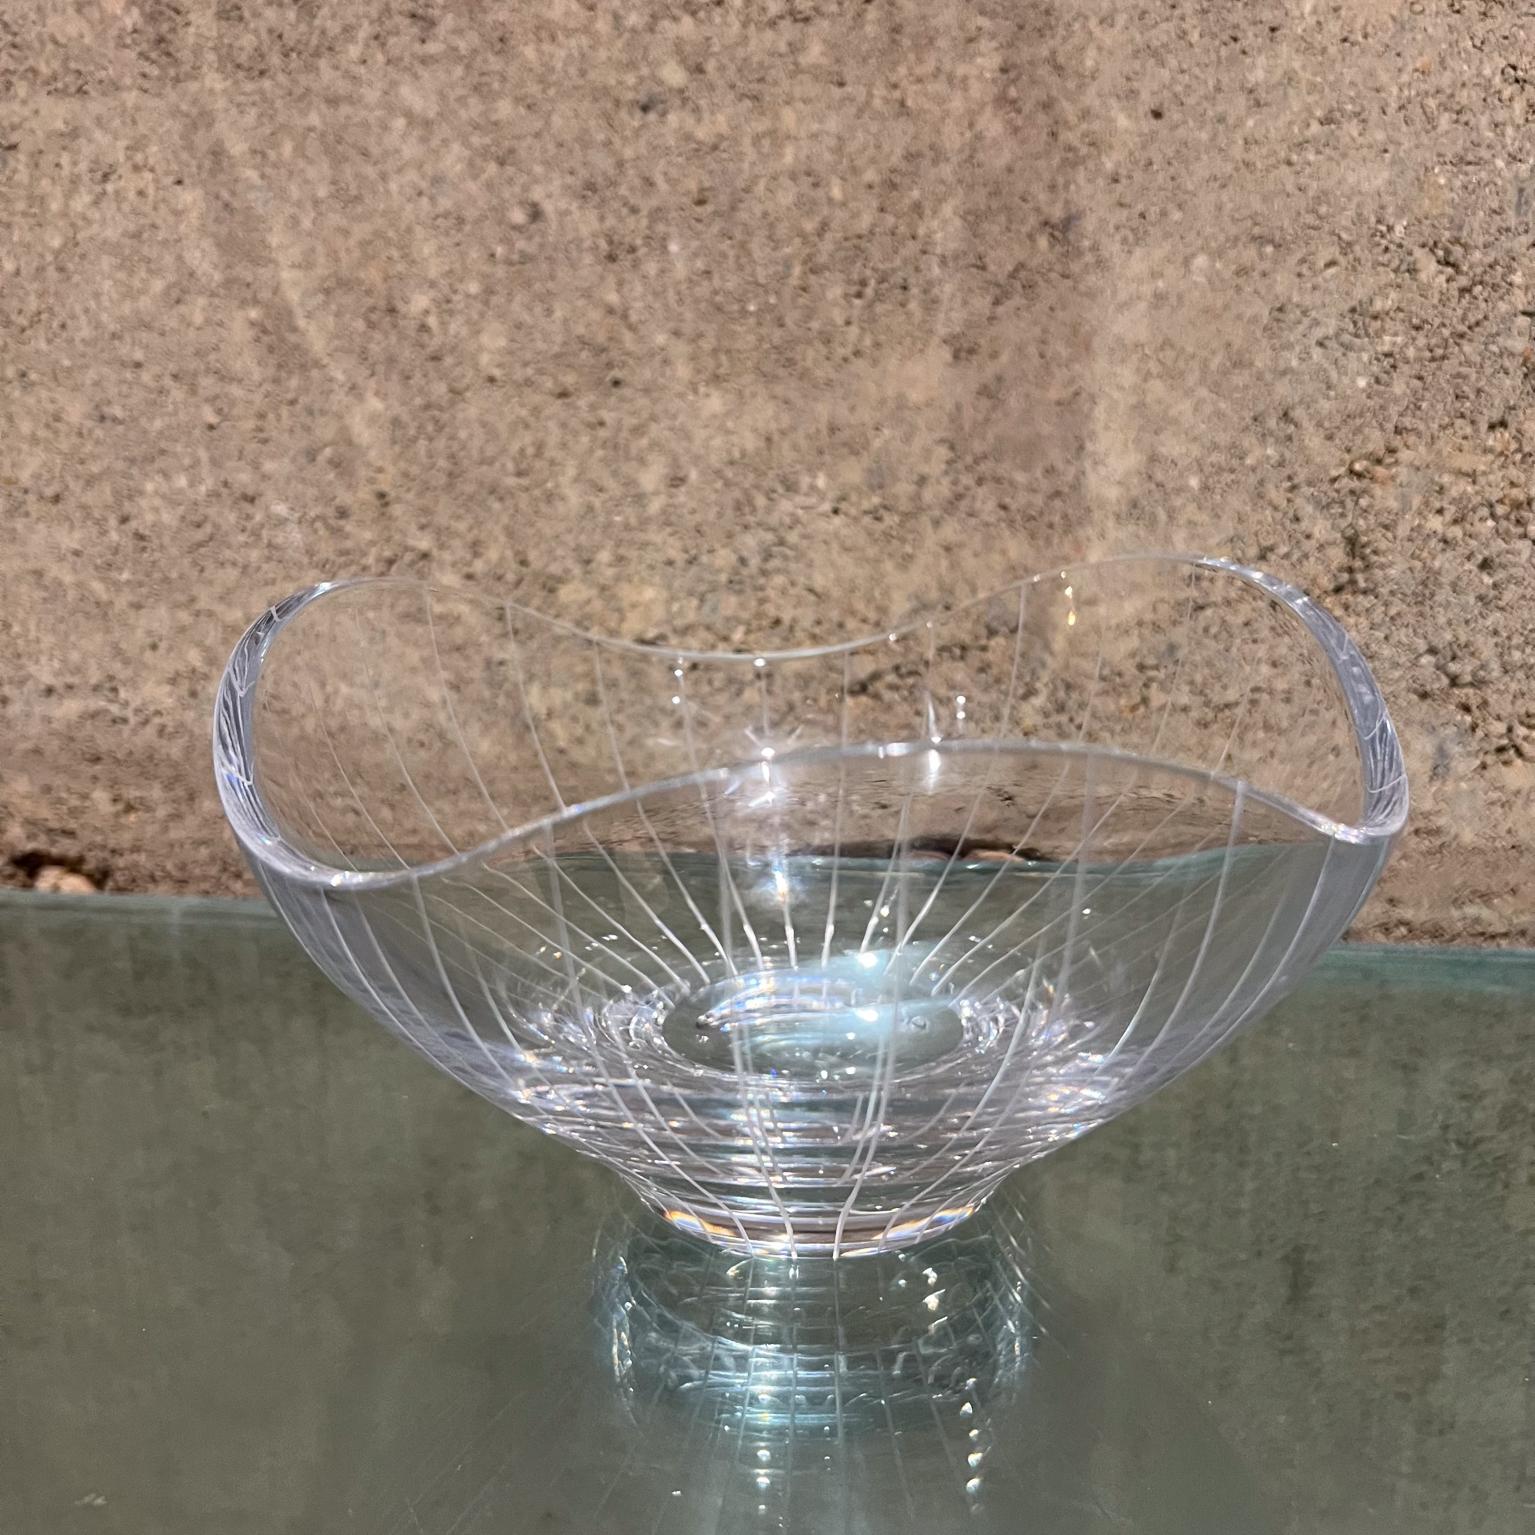 1980s Villeroy & Boch Germany Art Glass Sculptural Bowl Cut Crystal In Good Condition For Sale In Chula Vista, CA